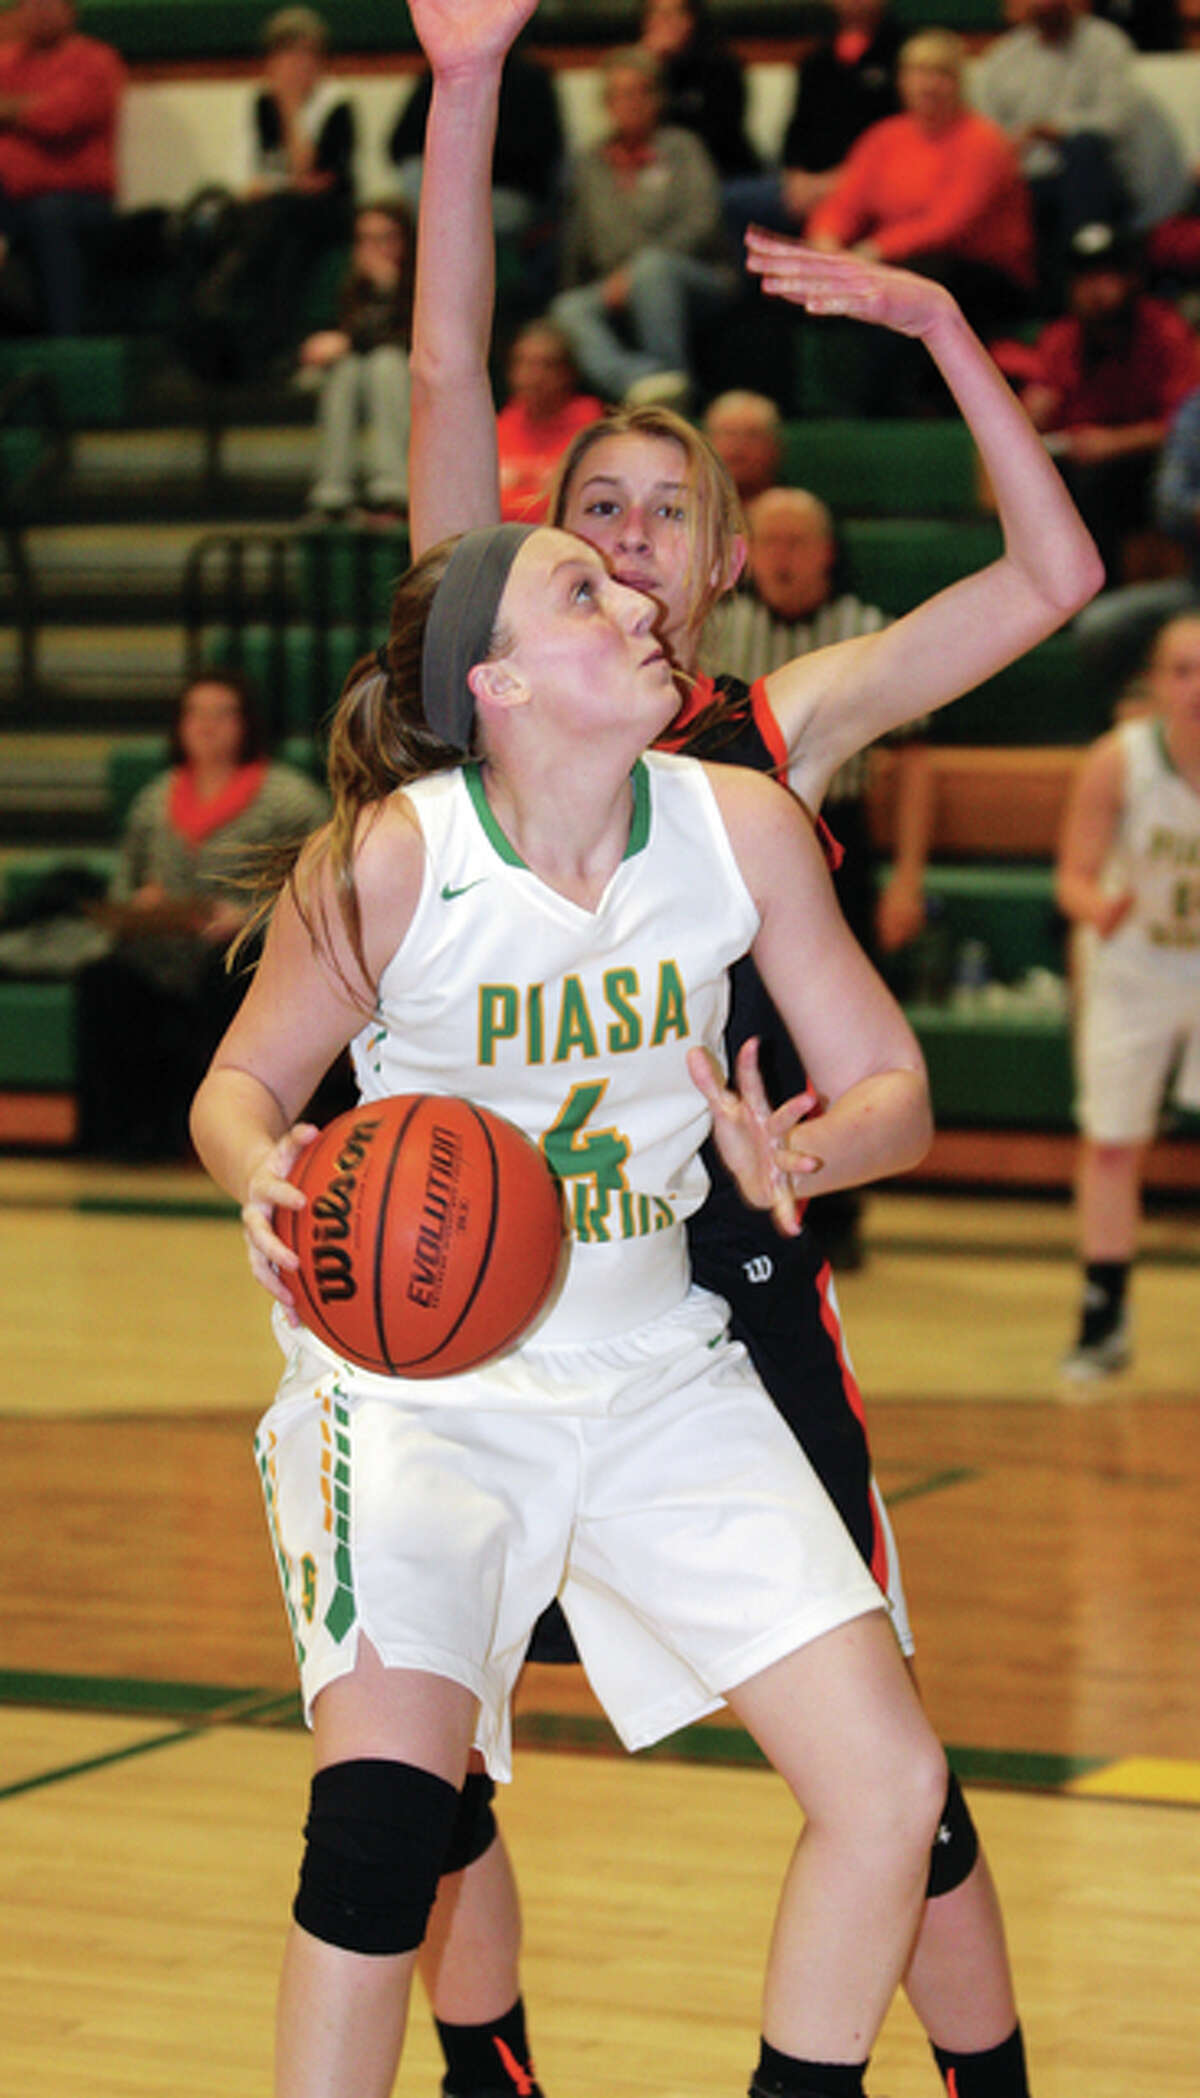 Southwestern’s Karlie Green (front) looks to the rim while being defended by Gillespie’s Abbie Barber during Thursday night’s Class 2A regional title game in Piasa.